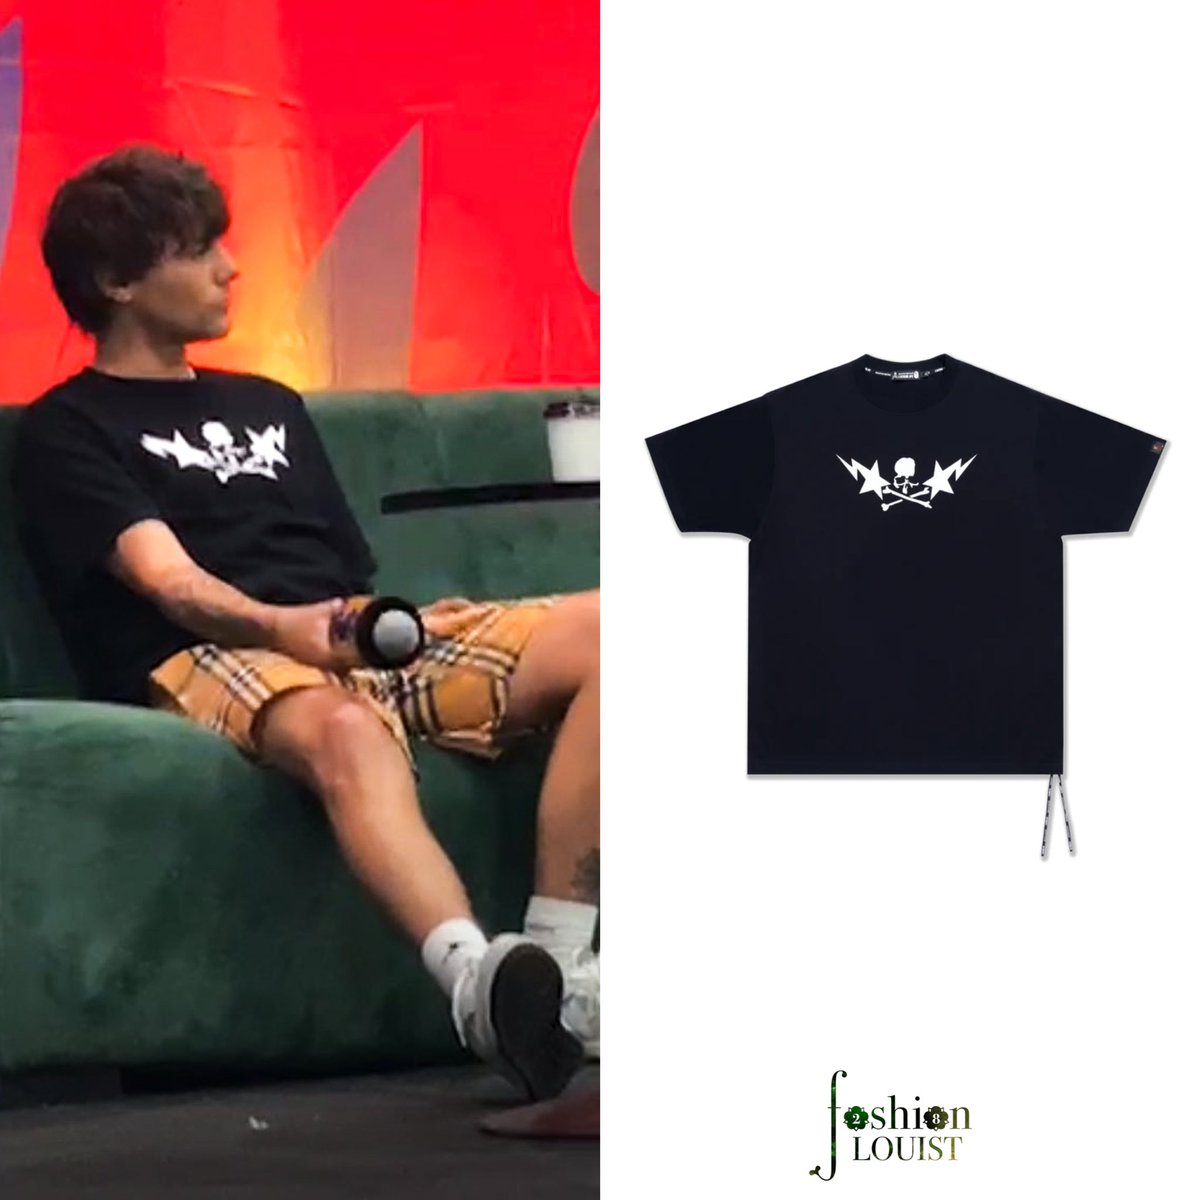 Louis is wearing an A Bathing Ape Mastermind MM Relaxed Fit Tee in Black today at #TecatePalNorte — uk.bape.com/products/mvbte…